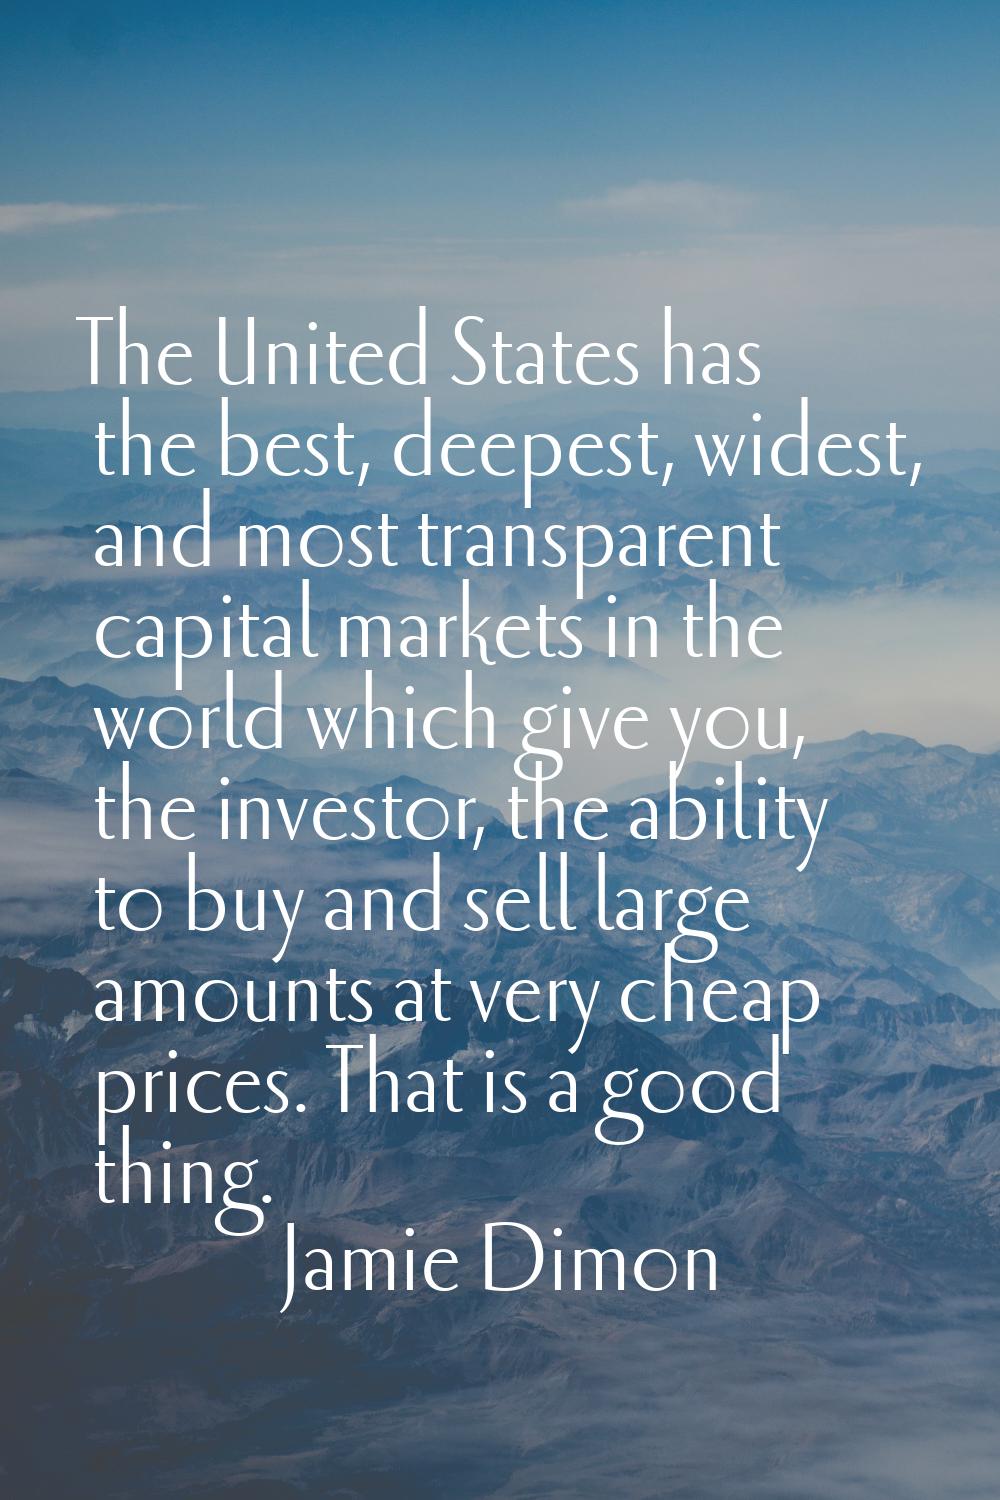 The United States has the best, deepest, widest, and most transparent capital markets in the world 